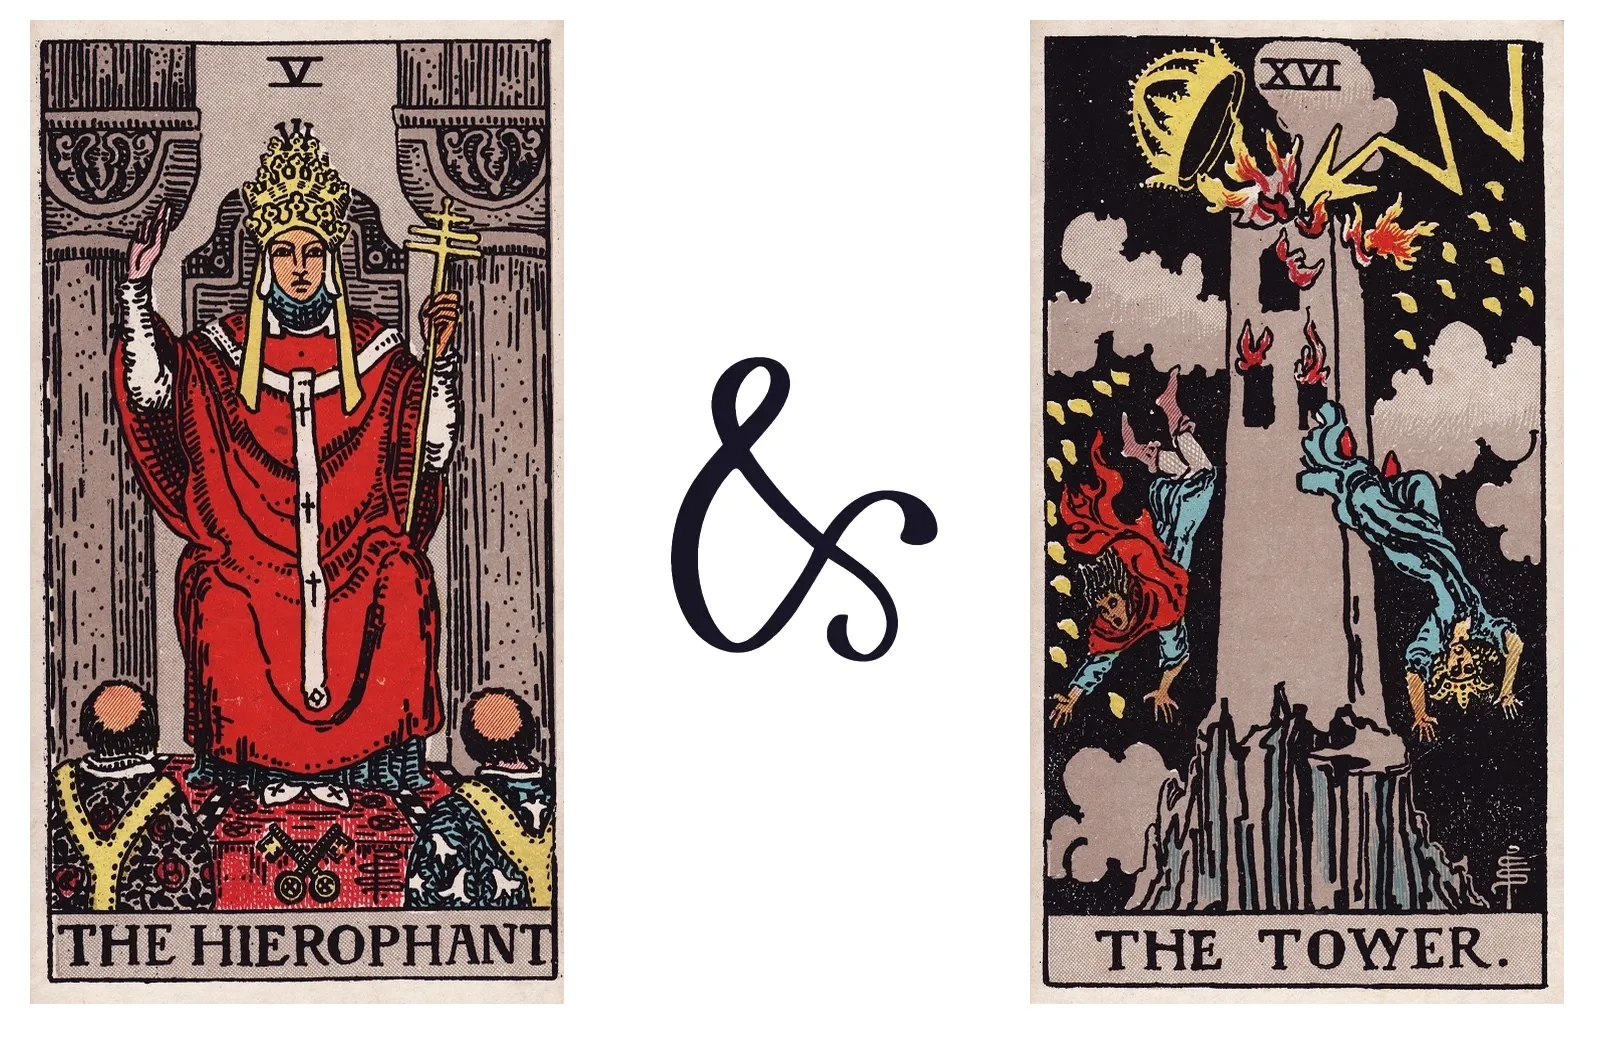 The Hierophant and The Tower